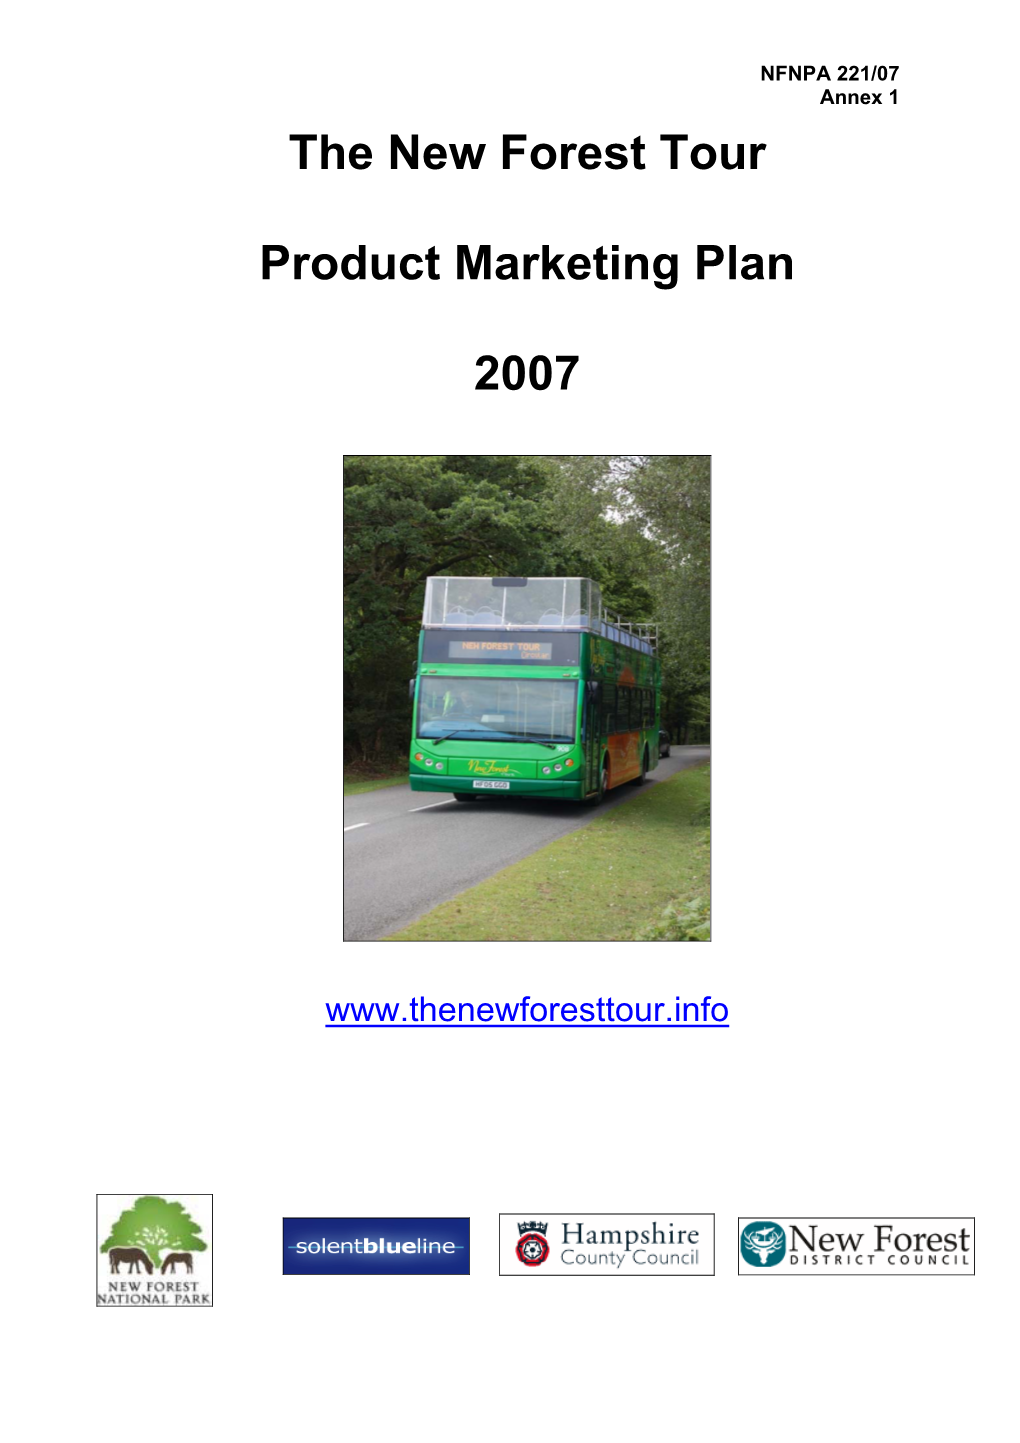 The New Forest Tour Product Marketing Plan 2007